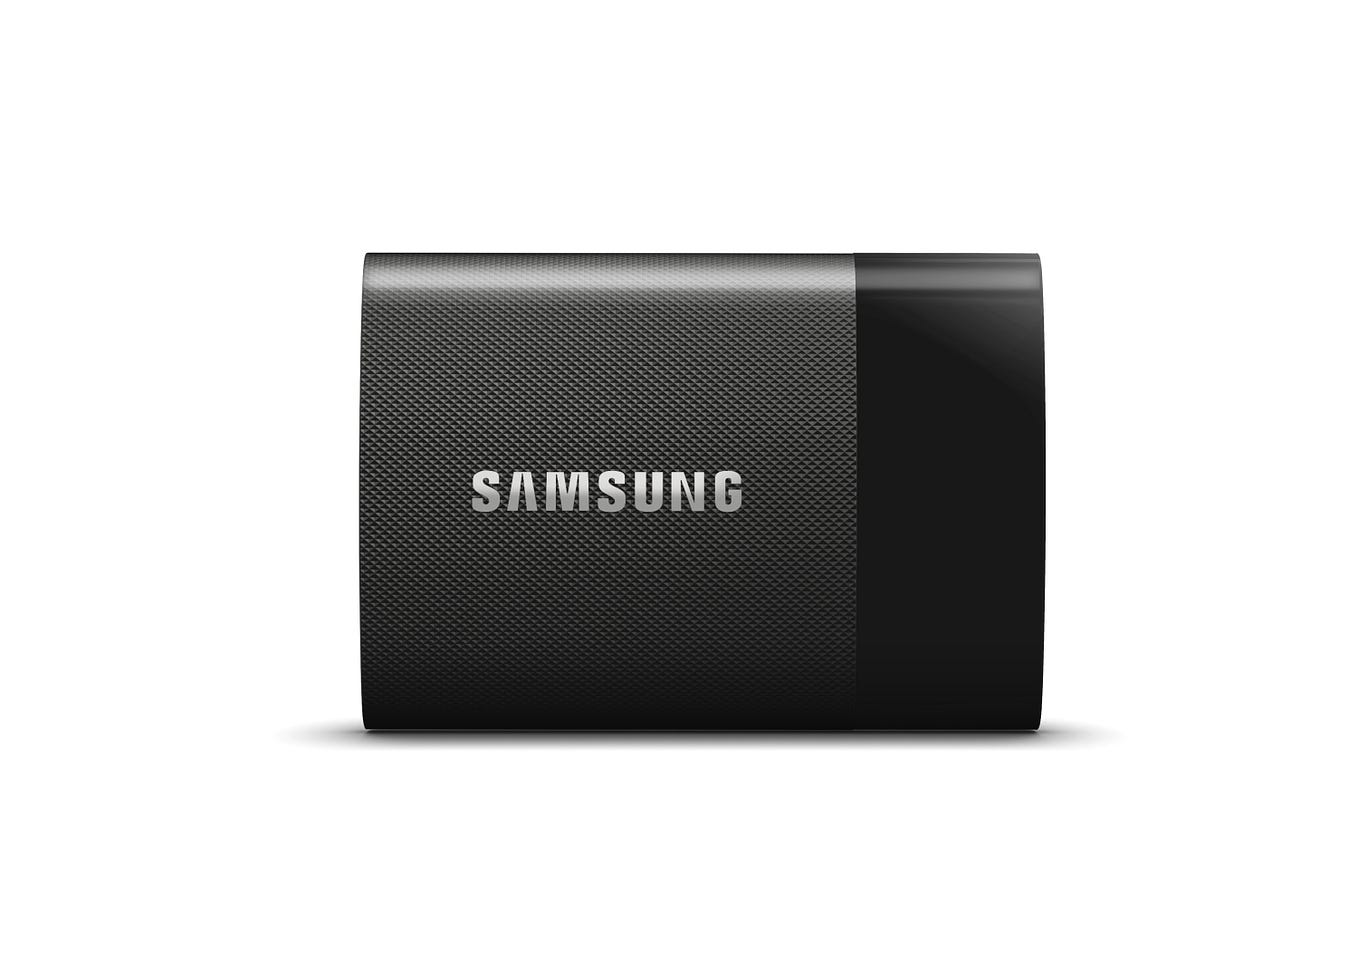 Removing Samsung Portable SSD T1 Kernel Extensions from your Mac